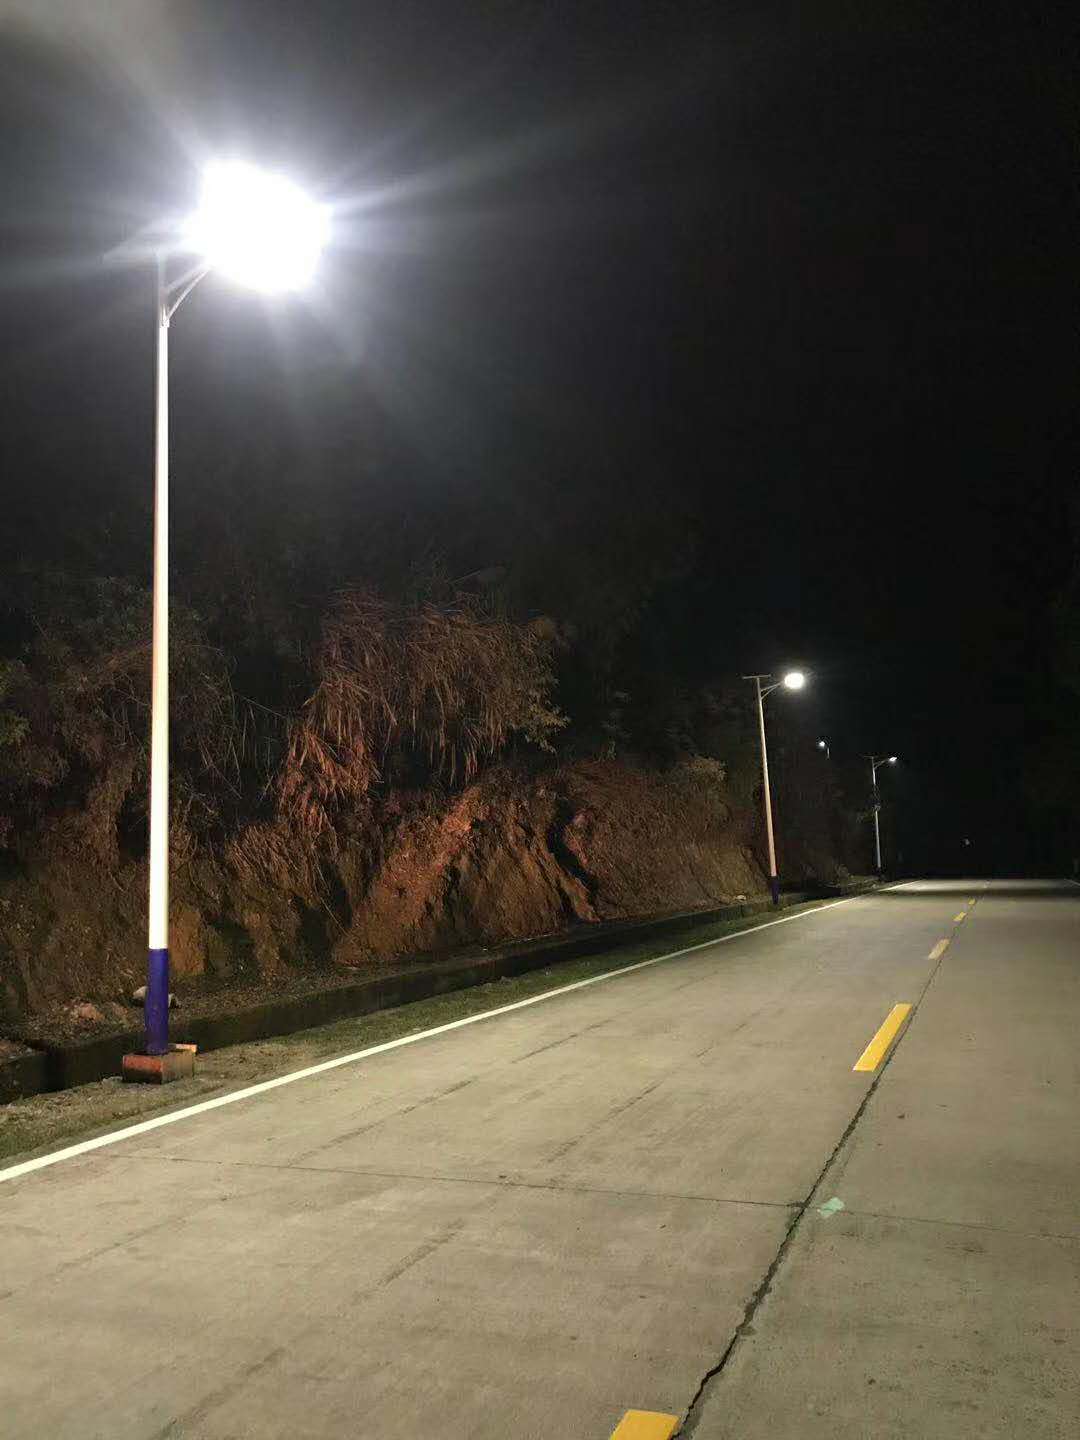 What are the advantages of solar street lights for rural roads compared with ordinary street lights?